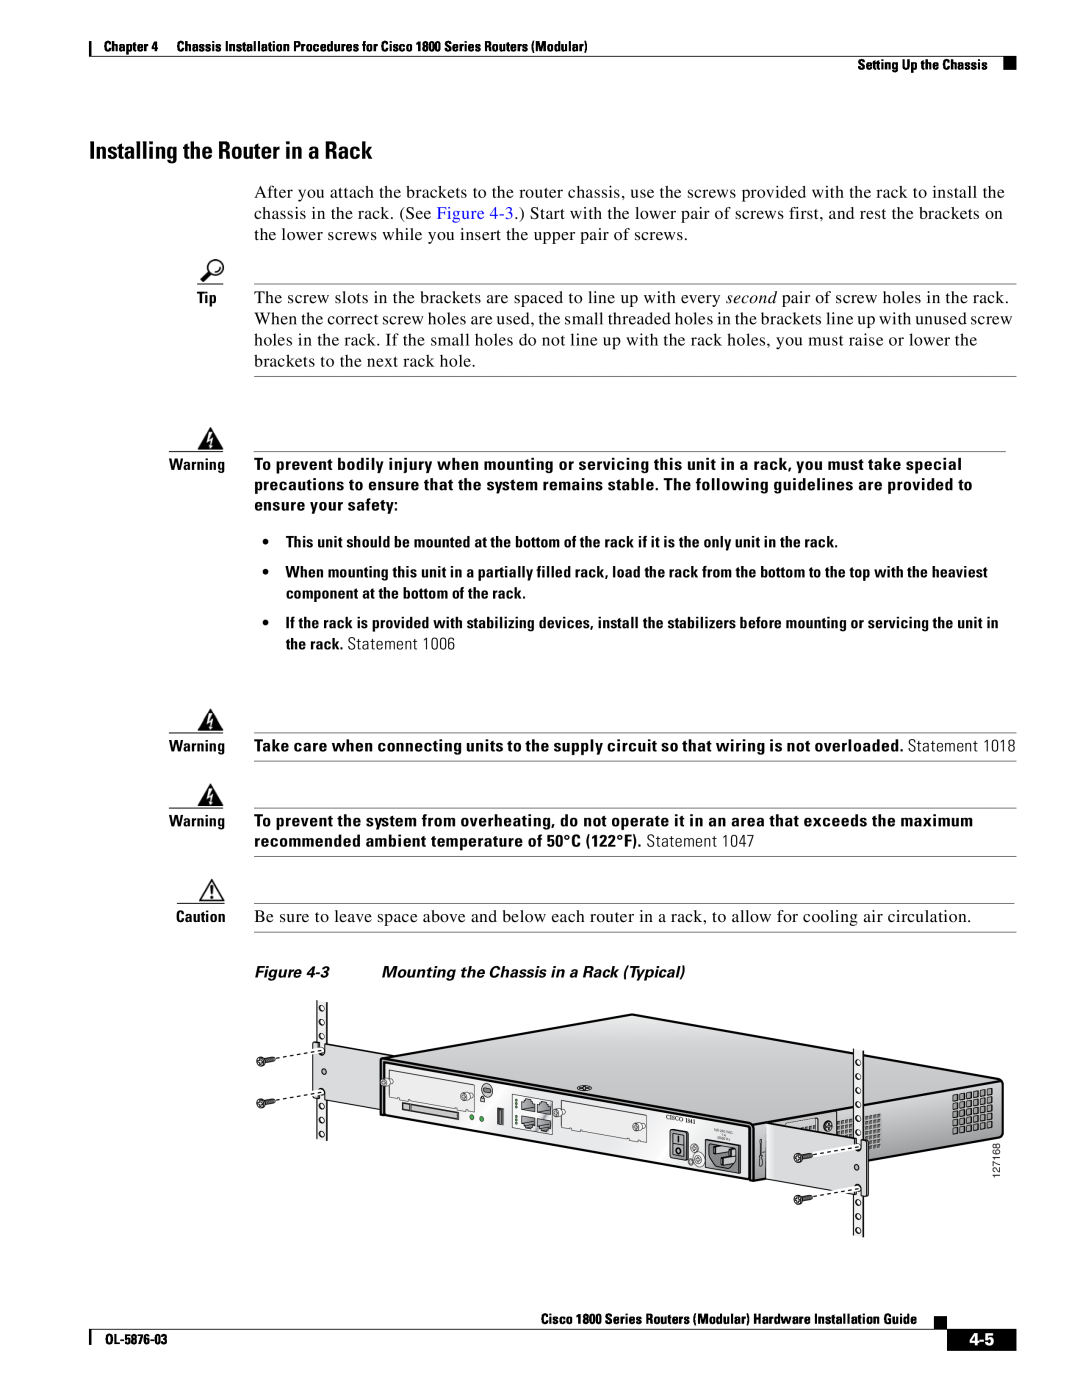 Cisco Systems CISCO1841-HSEC/K9-RF manual Installing the Router in a Rack, 3 Mounting the Chassis in a Rack Typical 